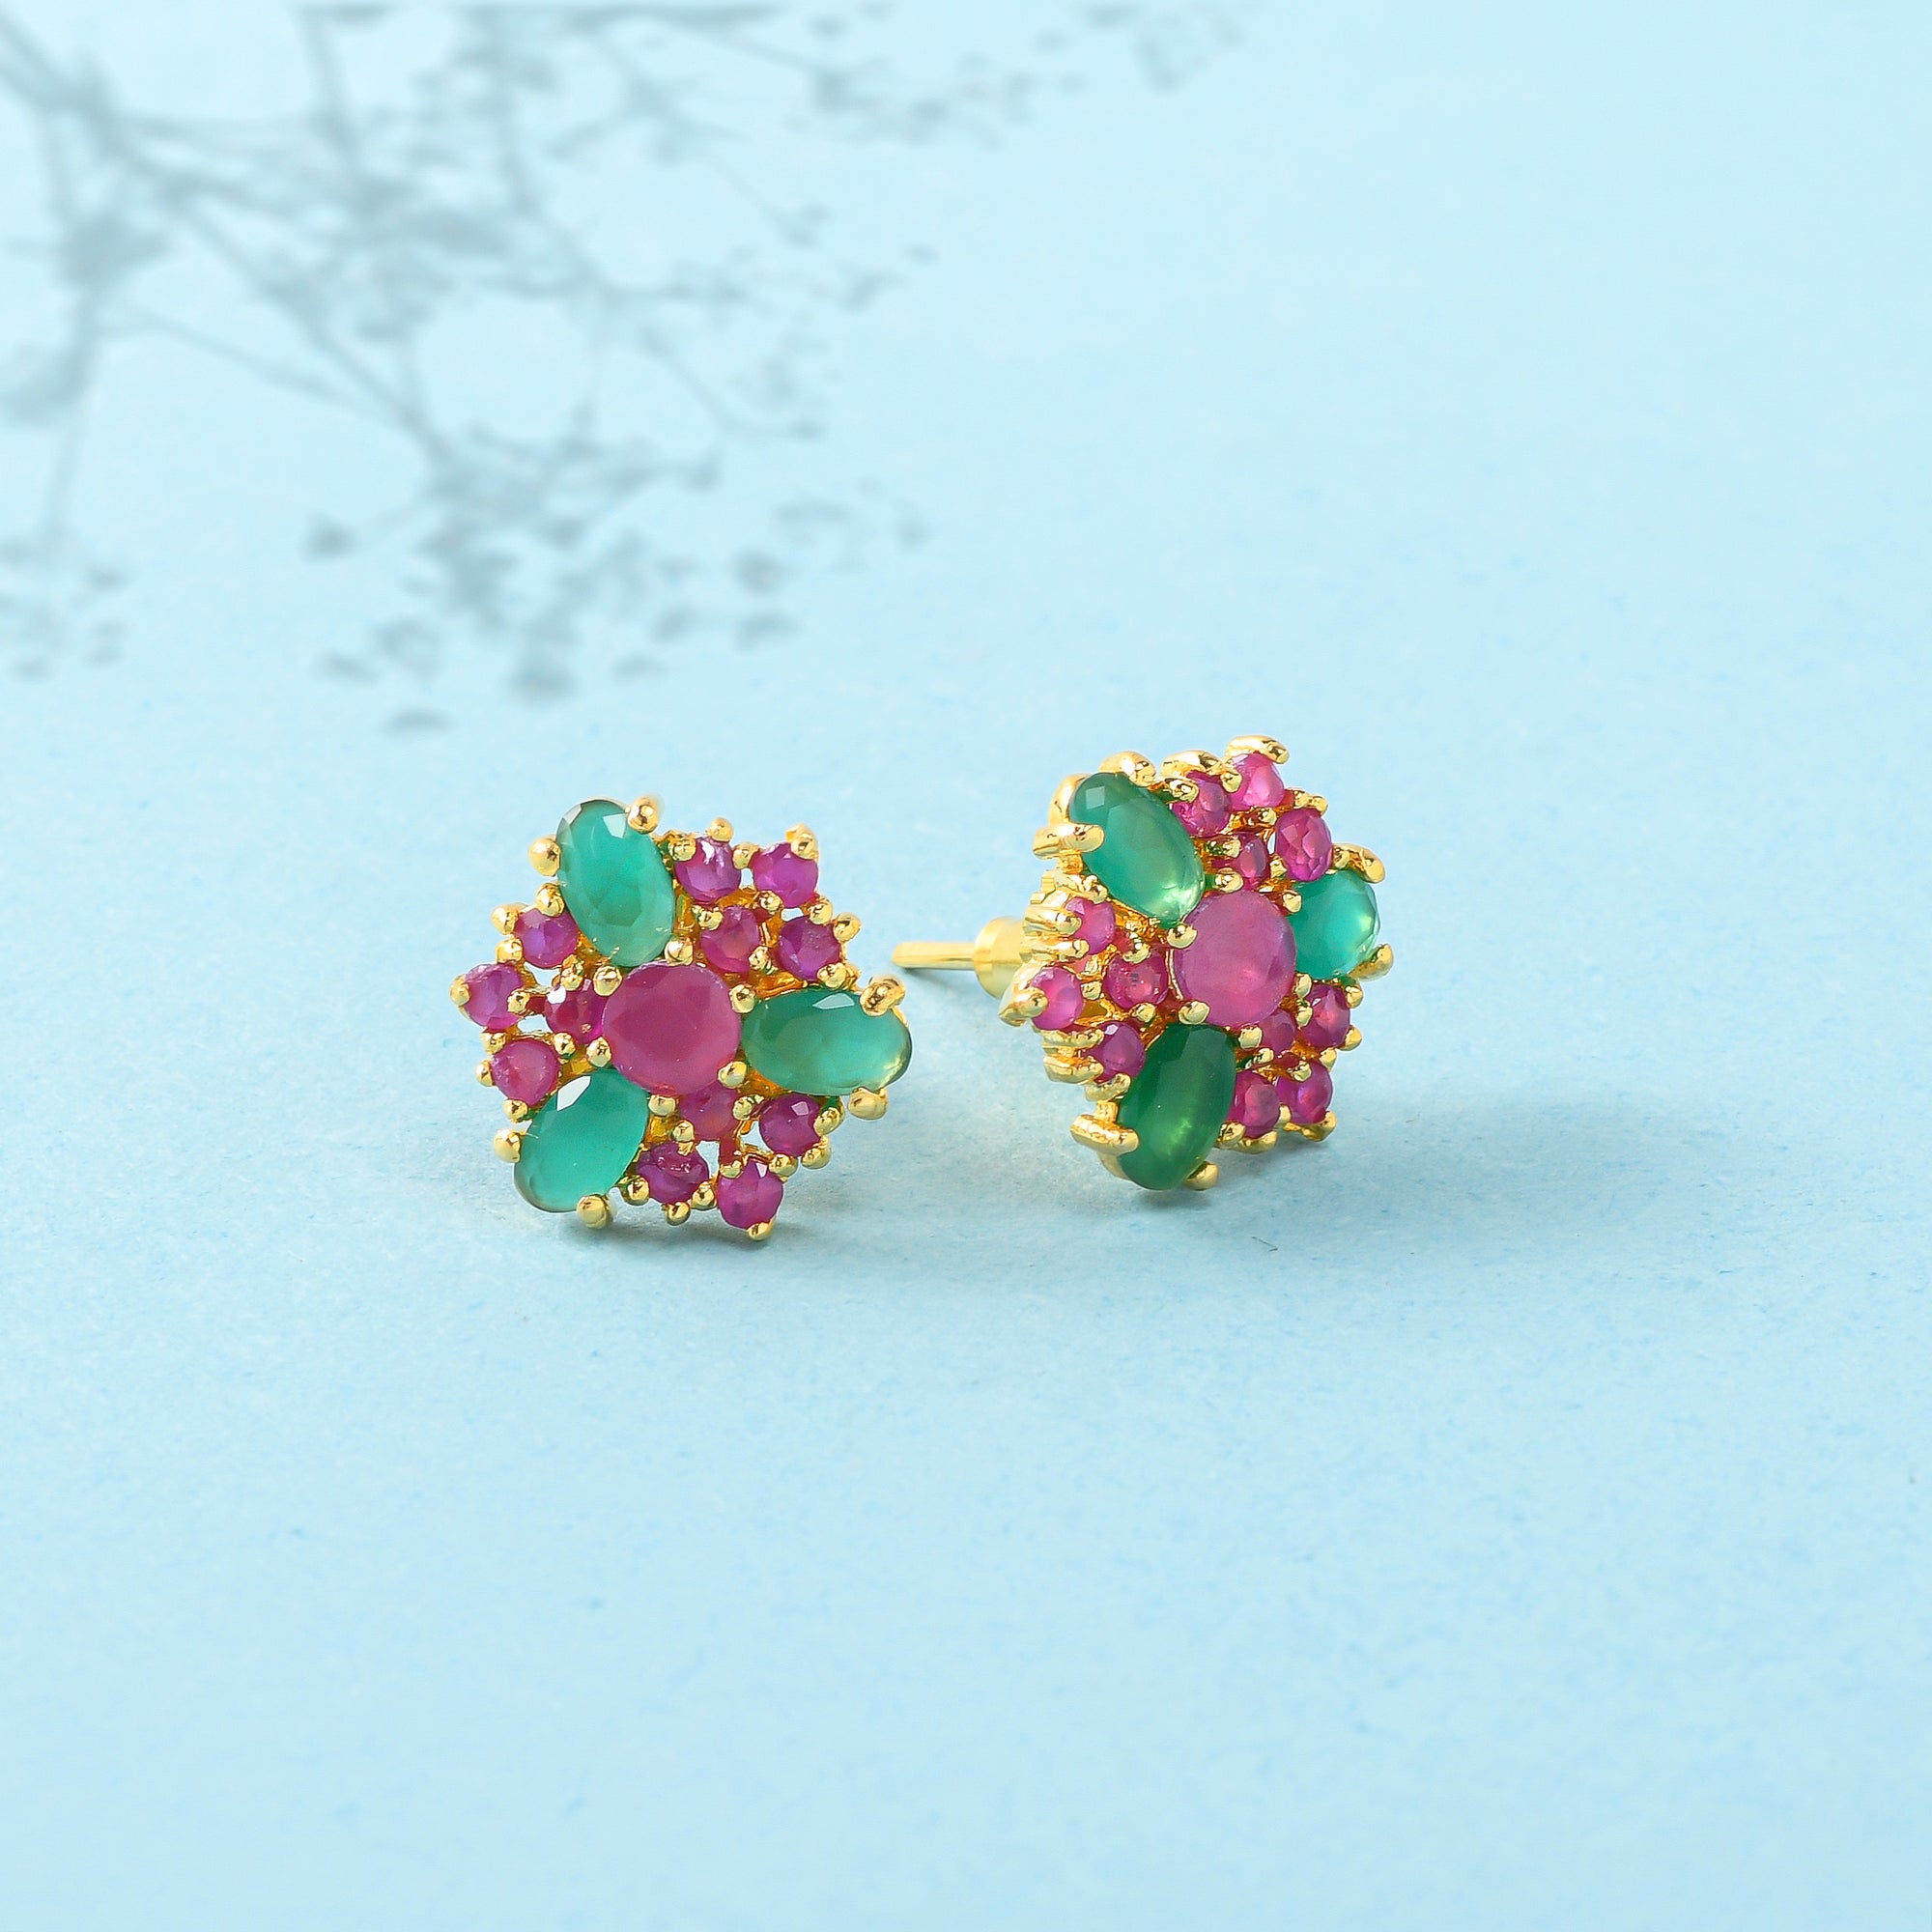 Women's Cluster Setting Green And Red Cz Stud Earrings - Voylla